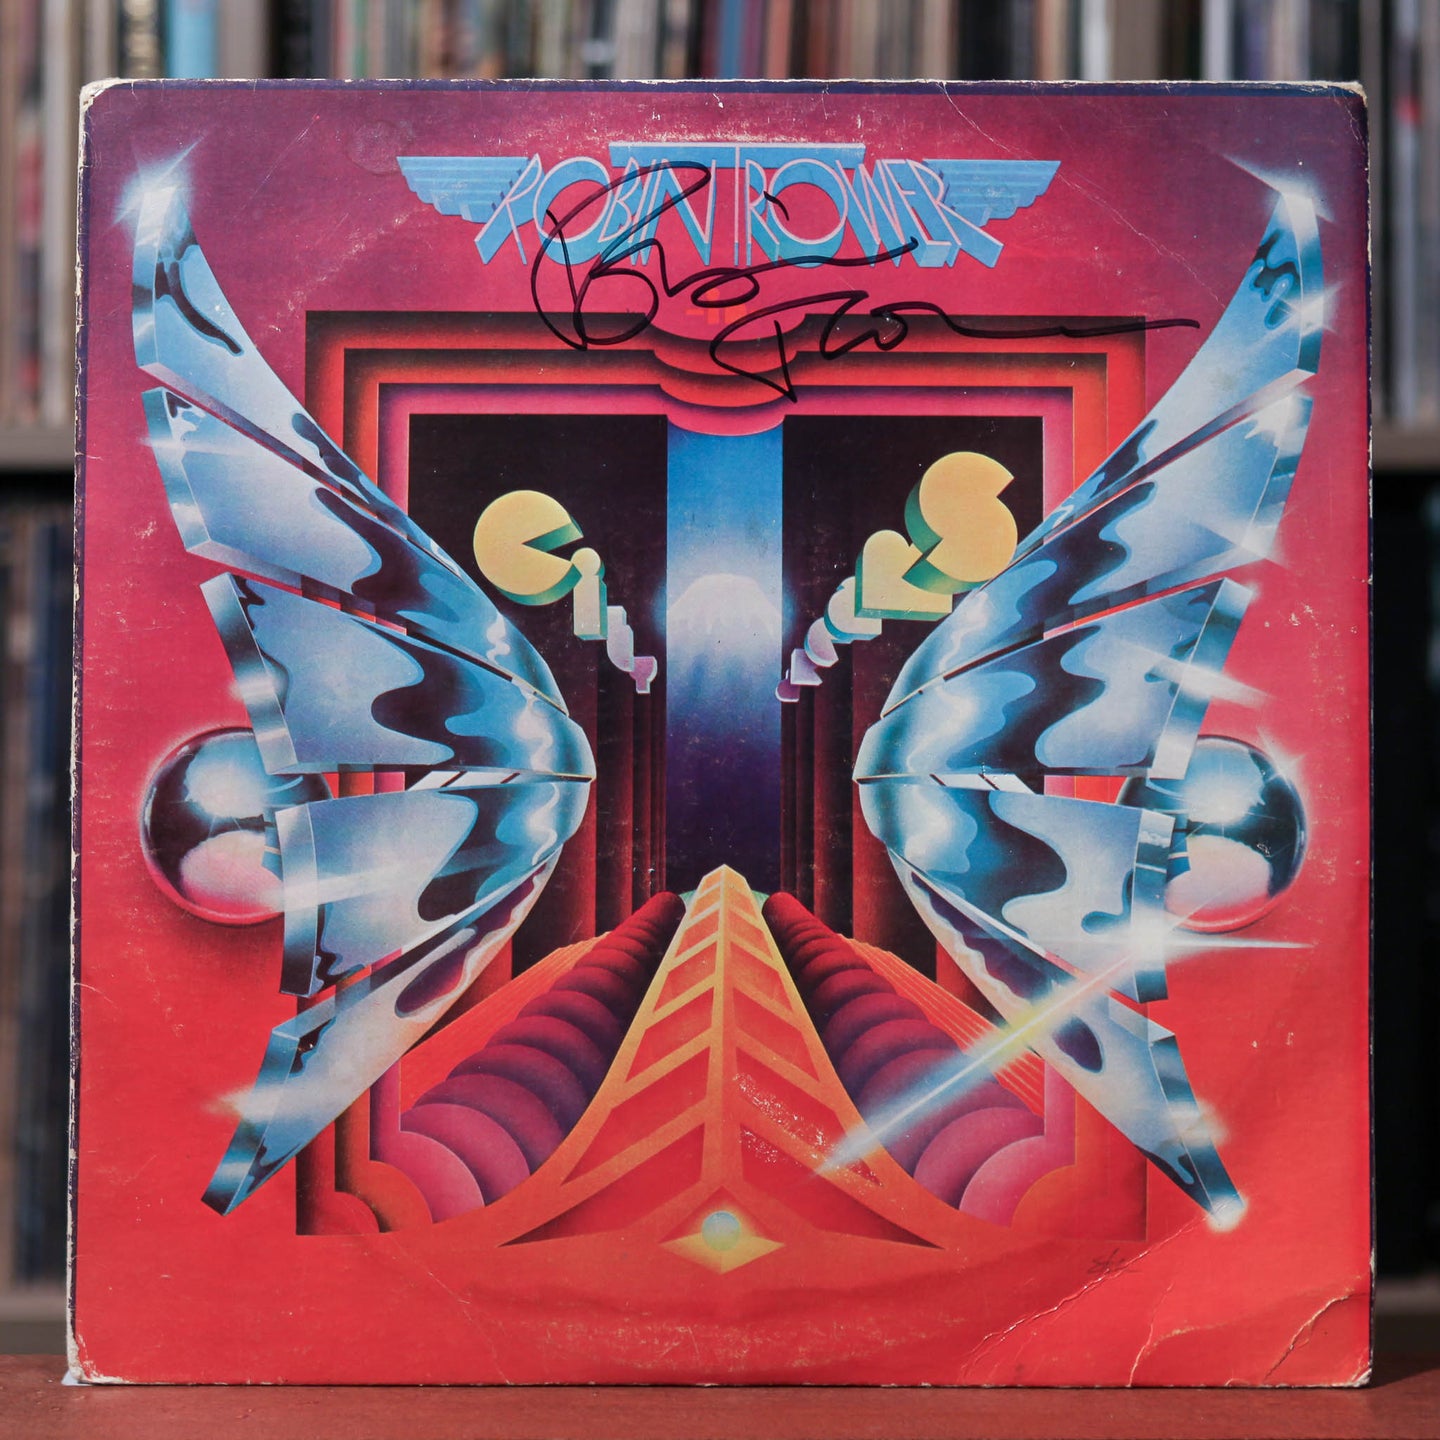 Robin Trower - In City Dreams - AUOTOGRAPHED - Chrysalis 1977